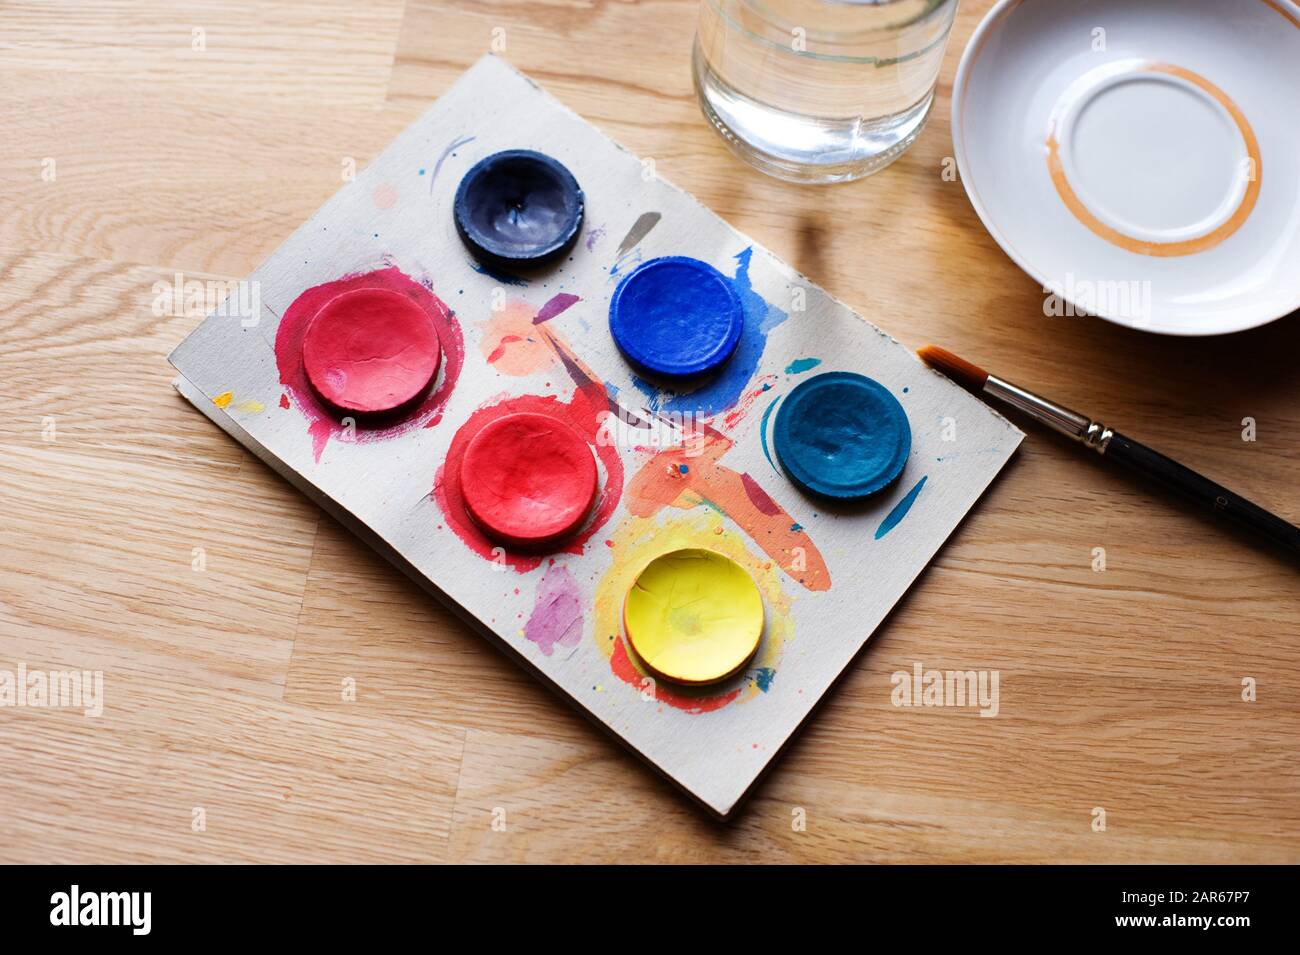 Watercolor paints with brush, plate and glass jar on the wooden table. Stock Photo